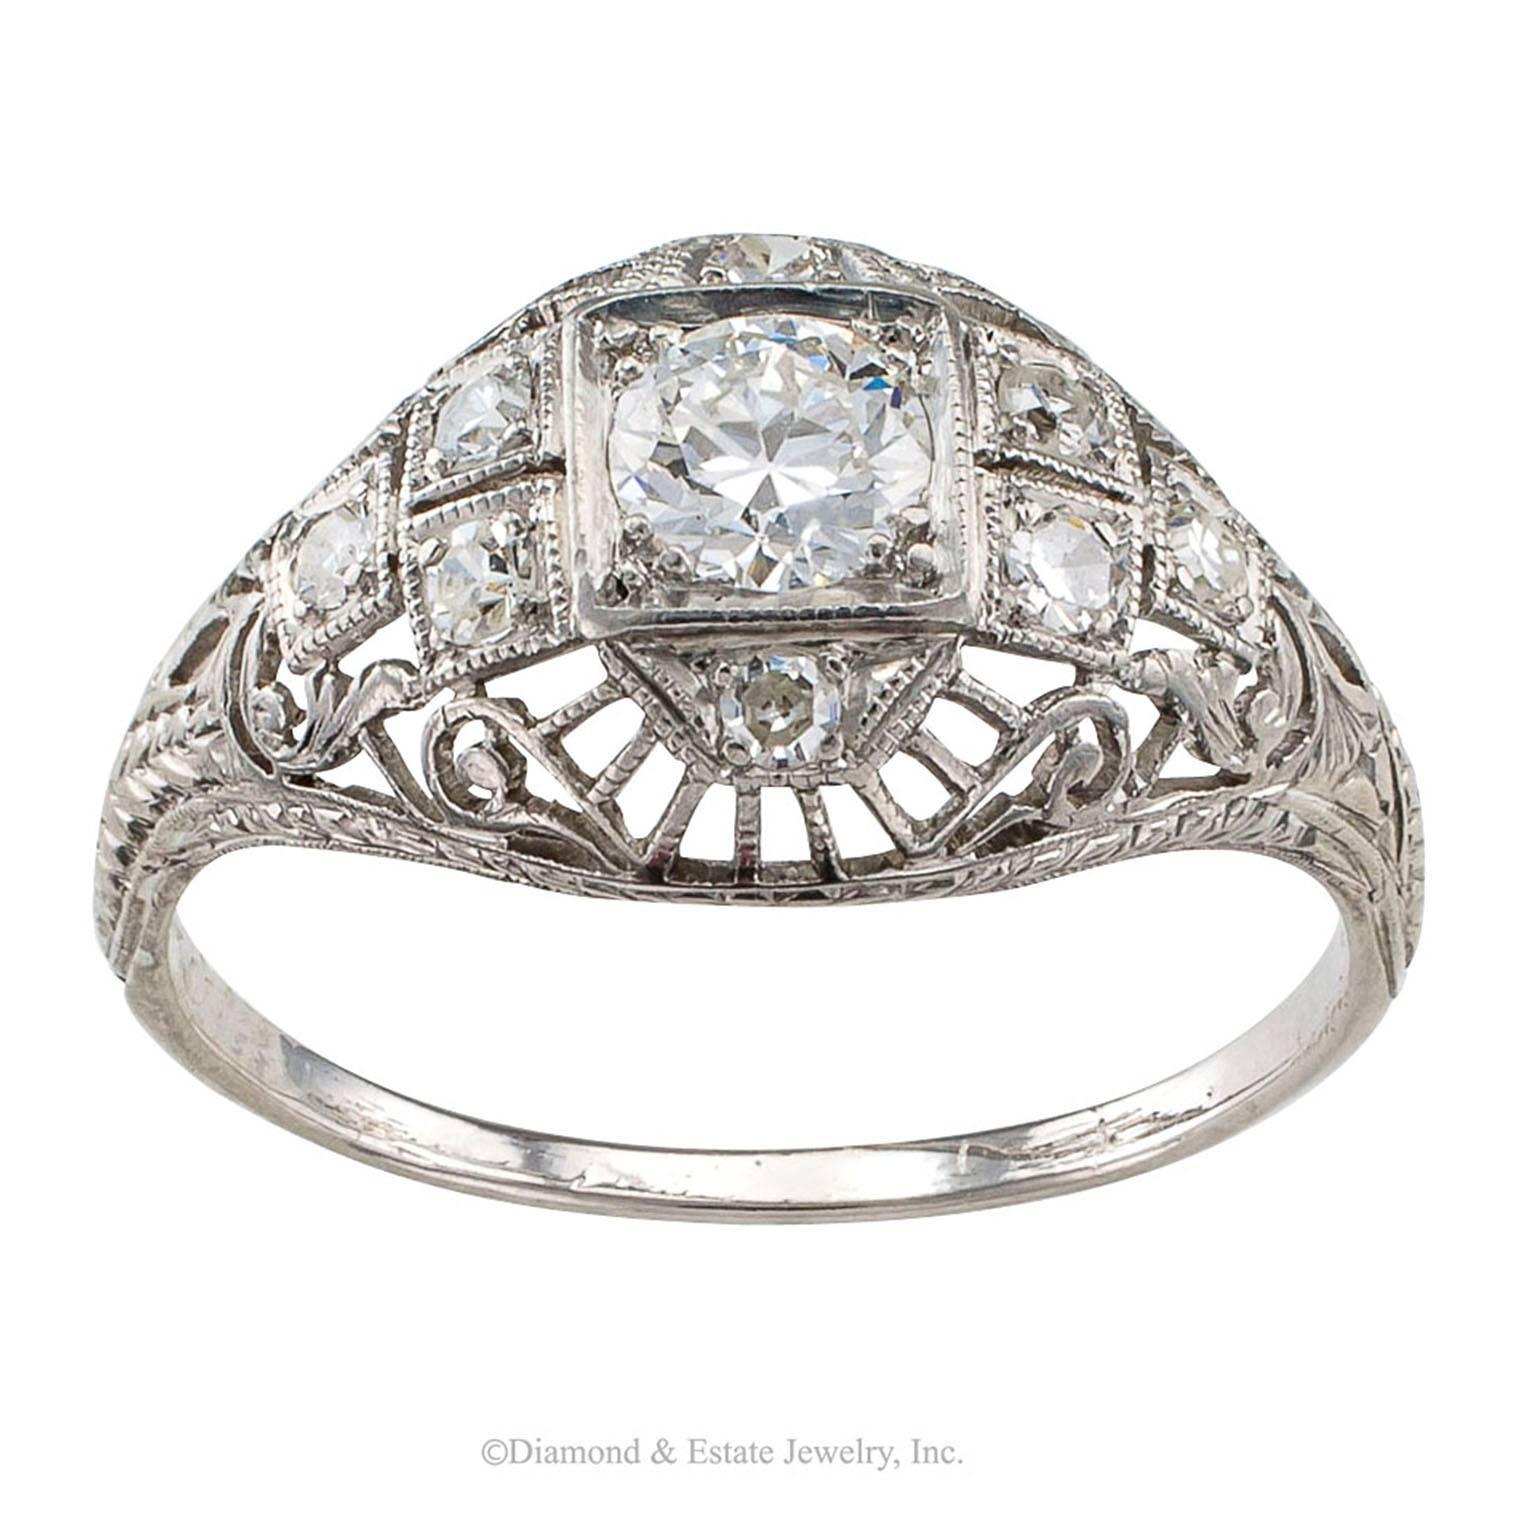 Edwardian Diamond Platinum Engagement Ring

Edwardian engagement diamond and platinum ring circa 1910.  The slightly domed design centers upon a larger old European-cut diamond weighing approximately 0.50 carat, approximately G - H color and SI